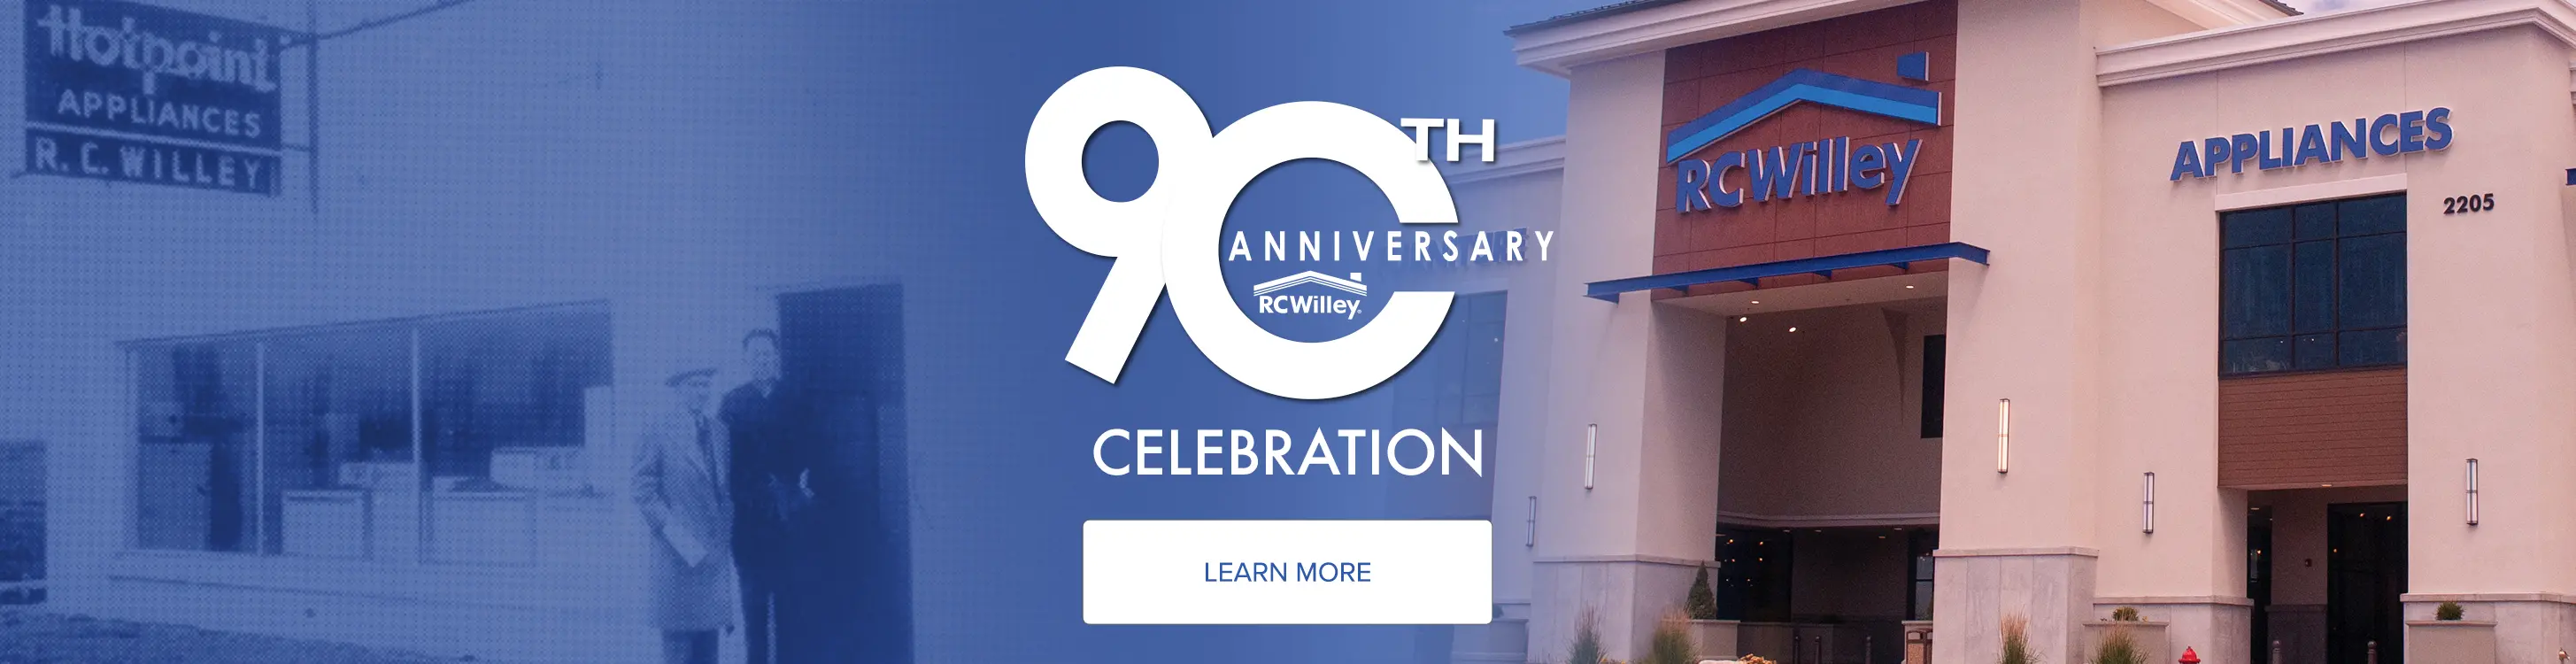 RC Willey 90th Anniversary Celebration. Learn More.